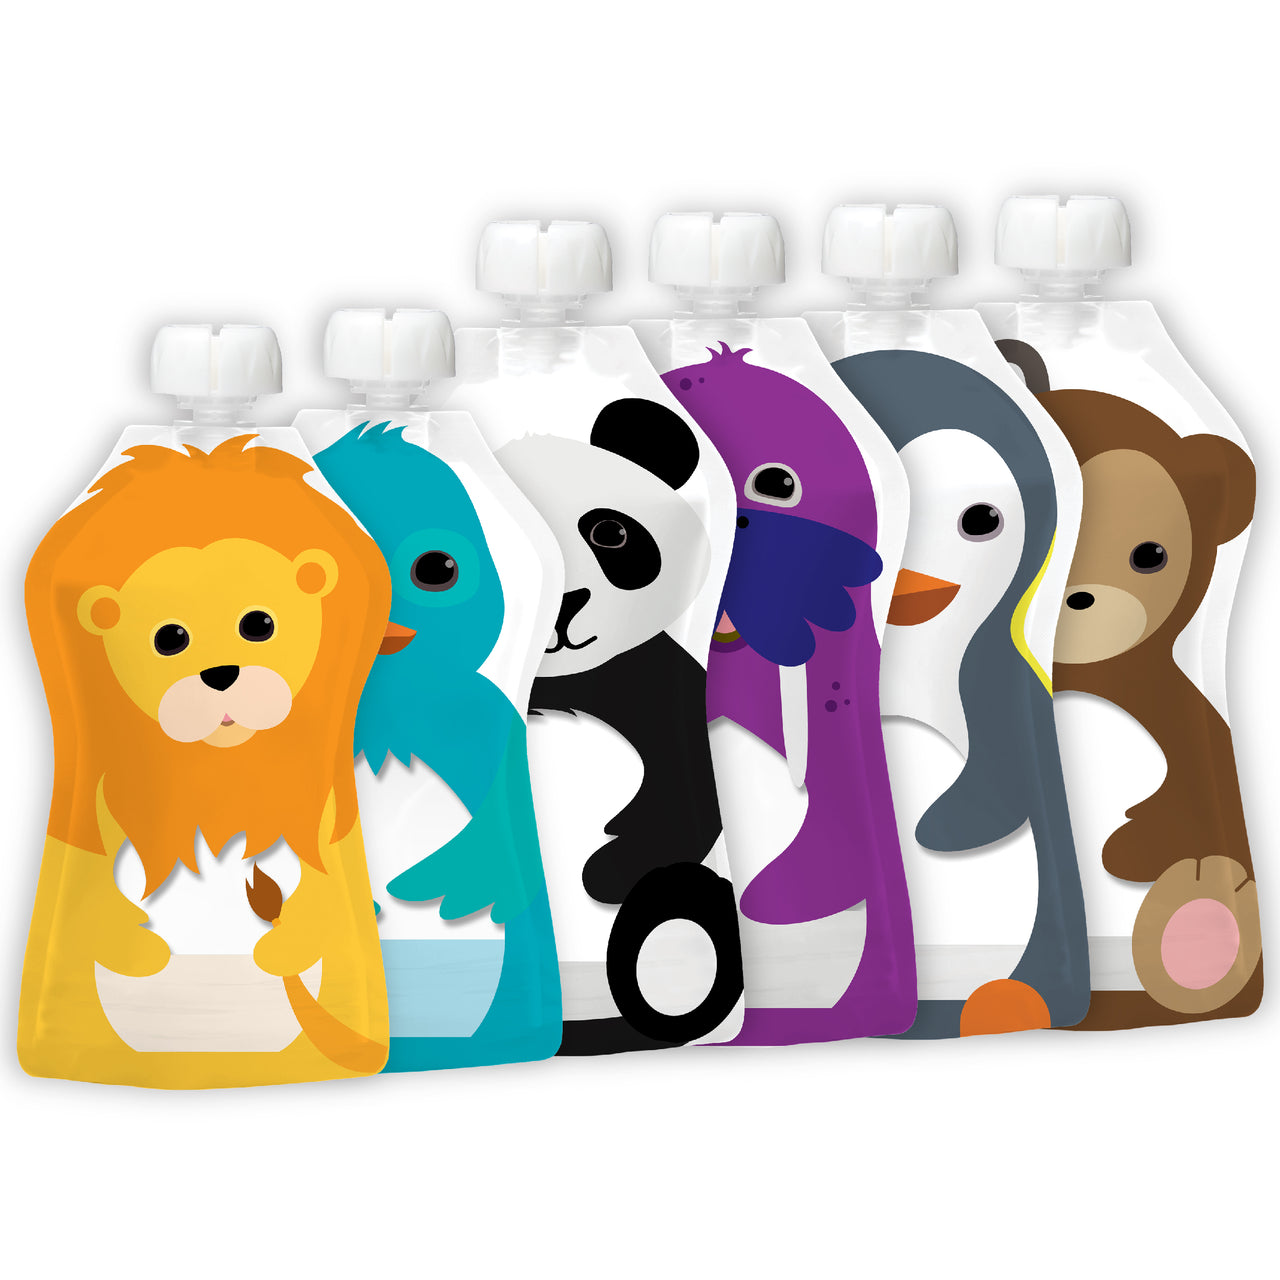 Squooshi Reusable Food Pouch | Assorted 6 Pack | 2 sizes